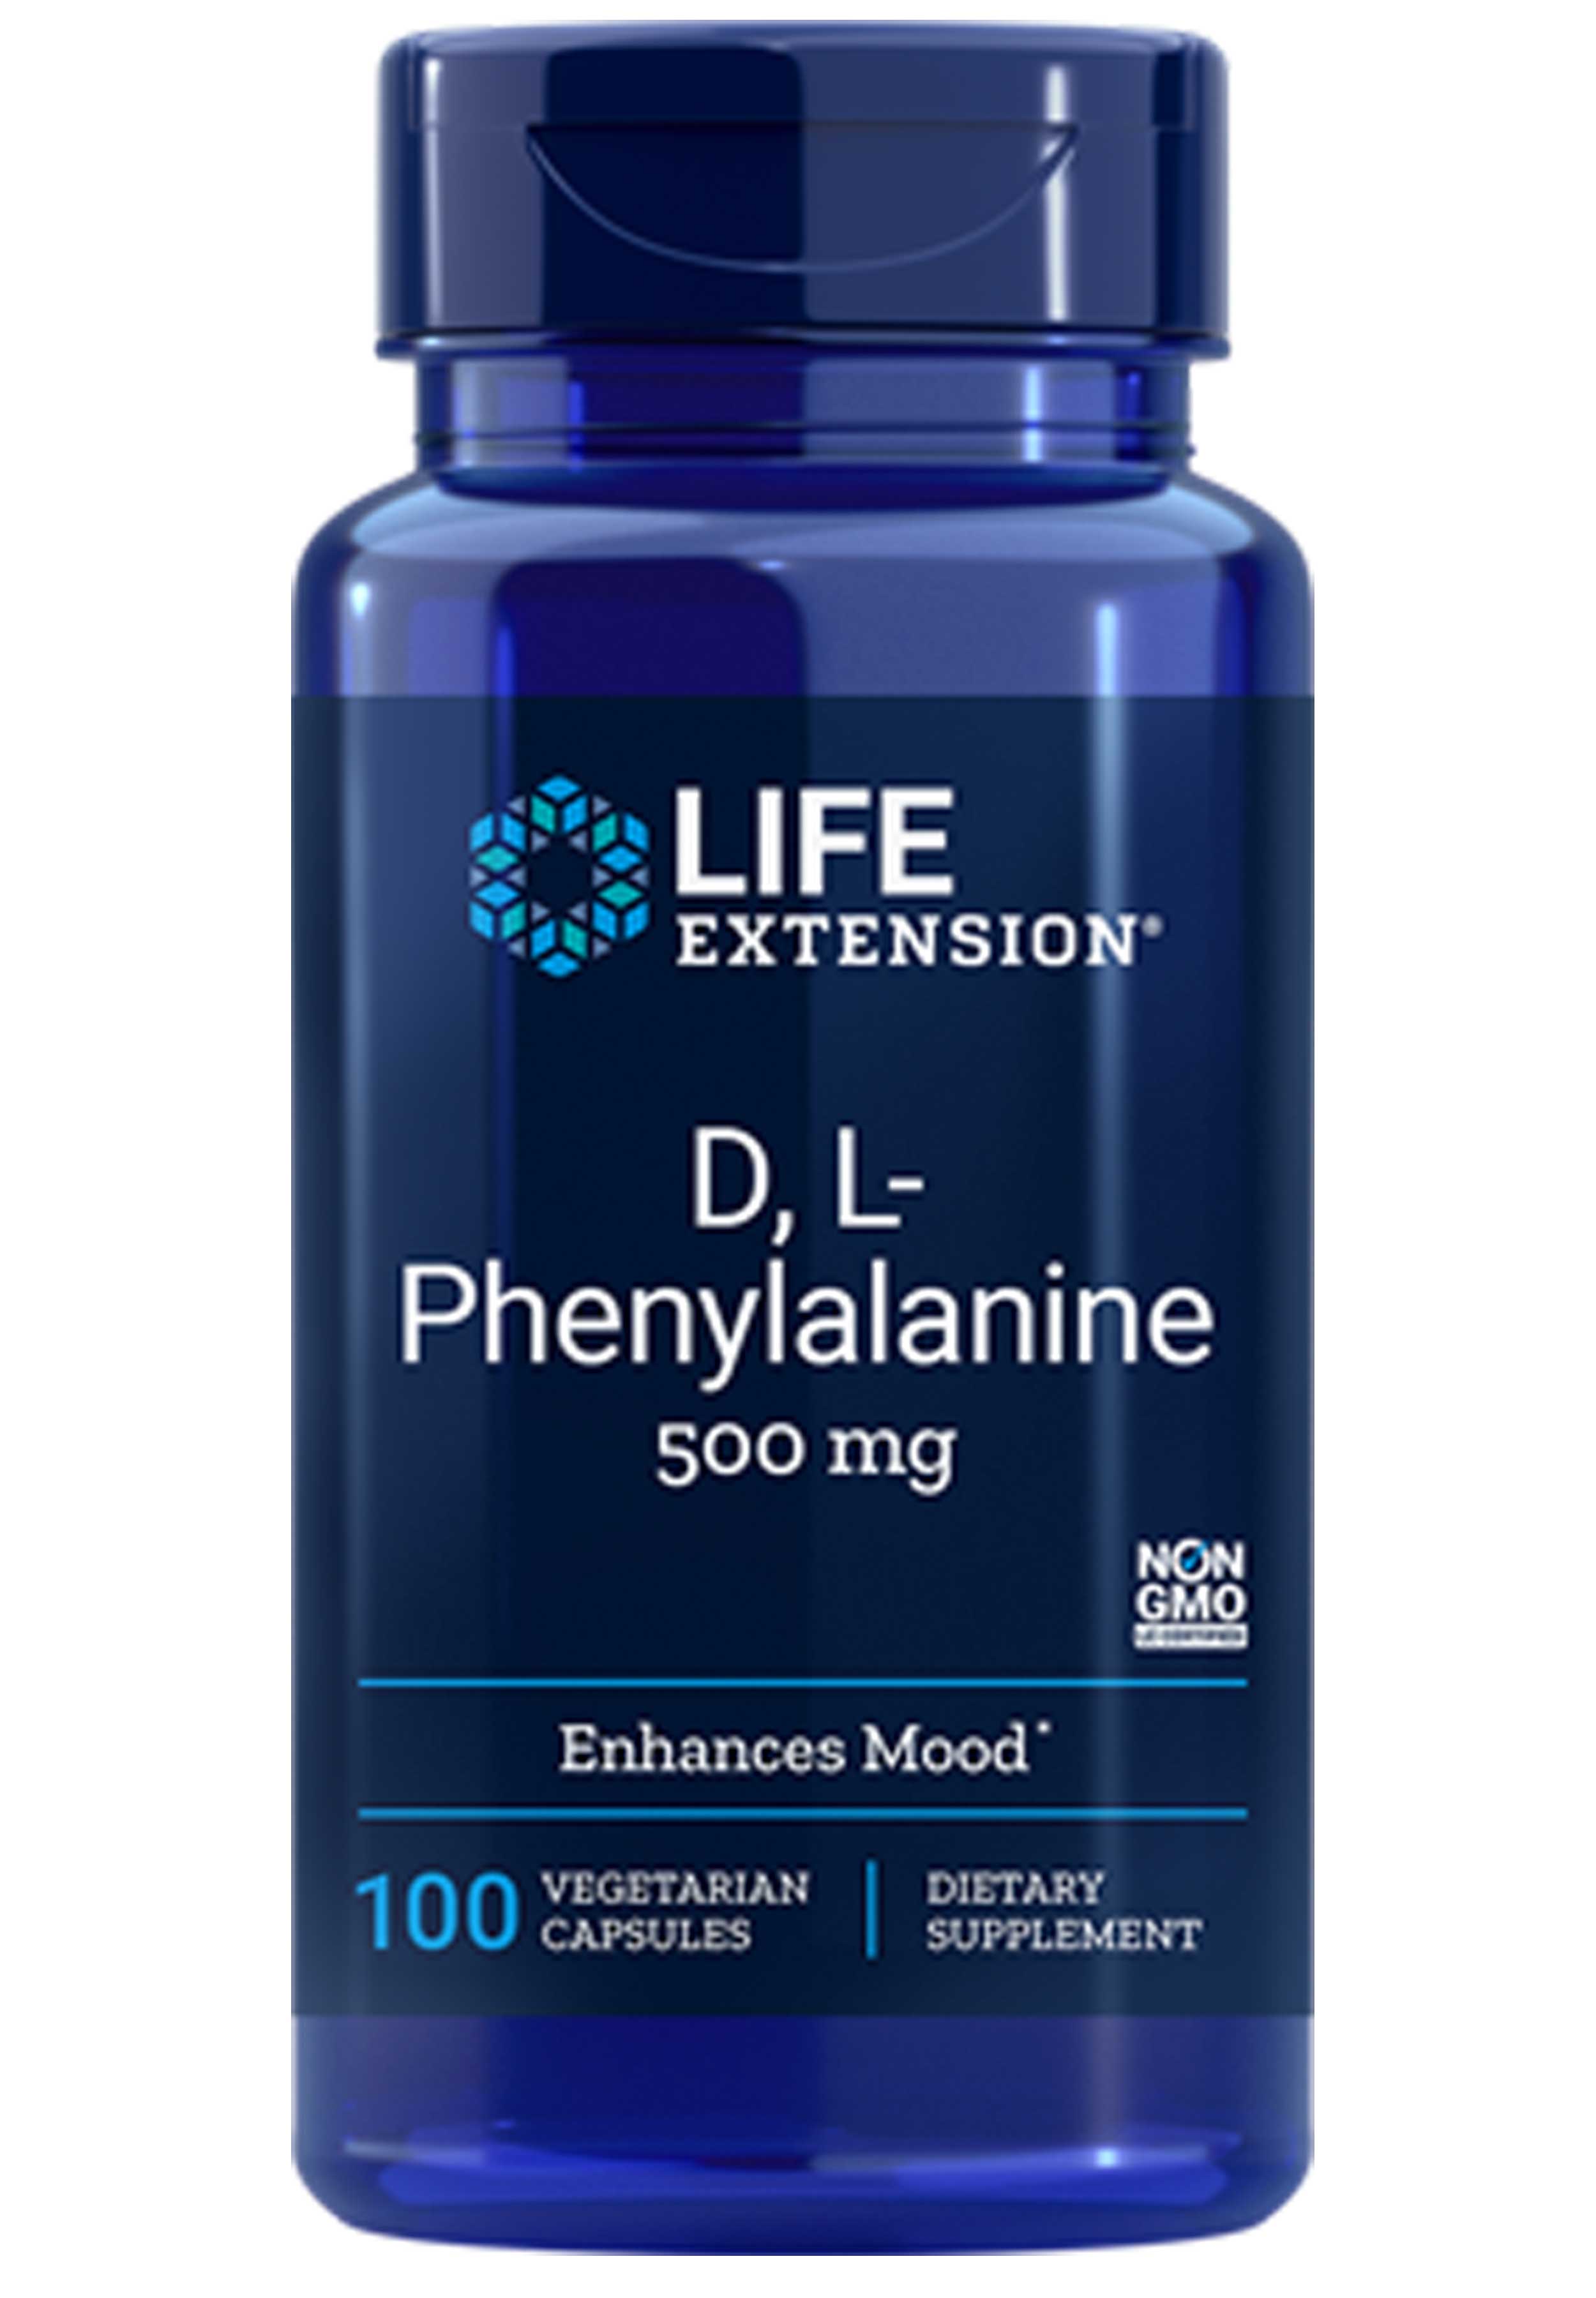 Life Extension D,L-Phenylalanine Capsules